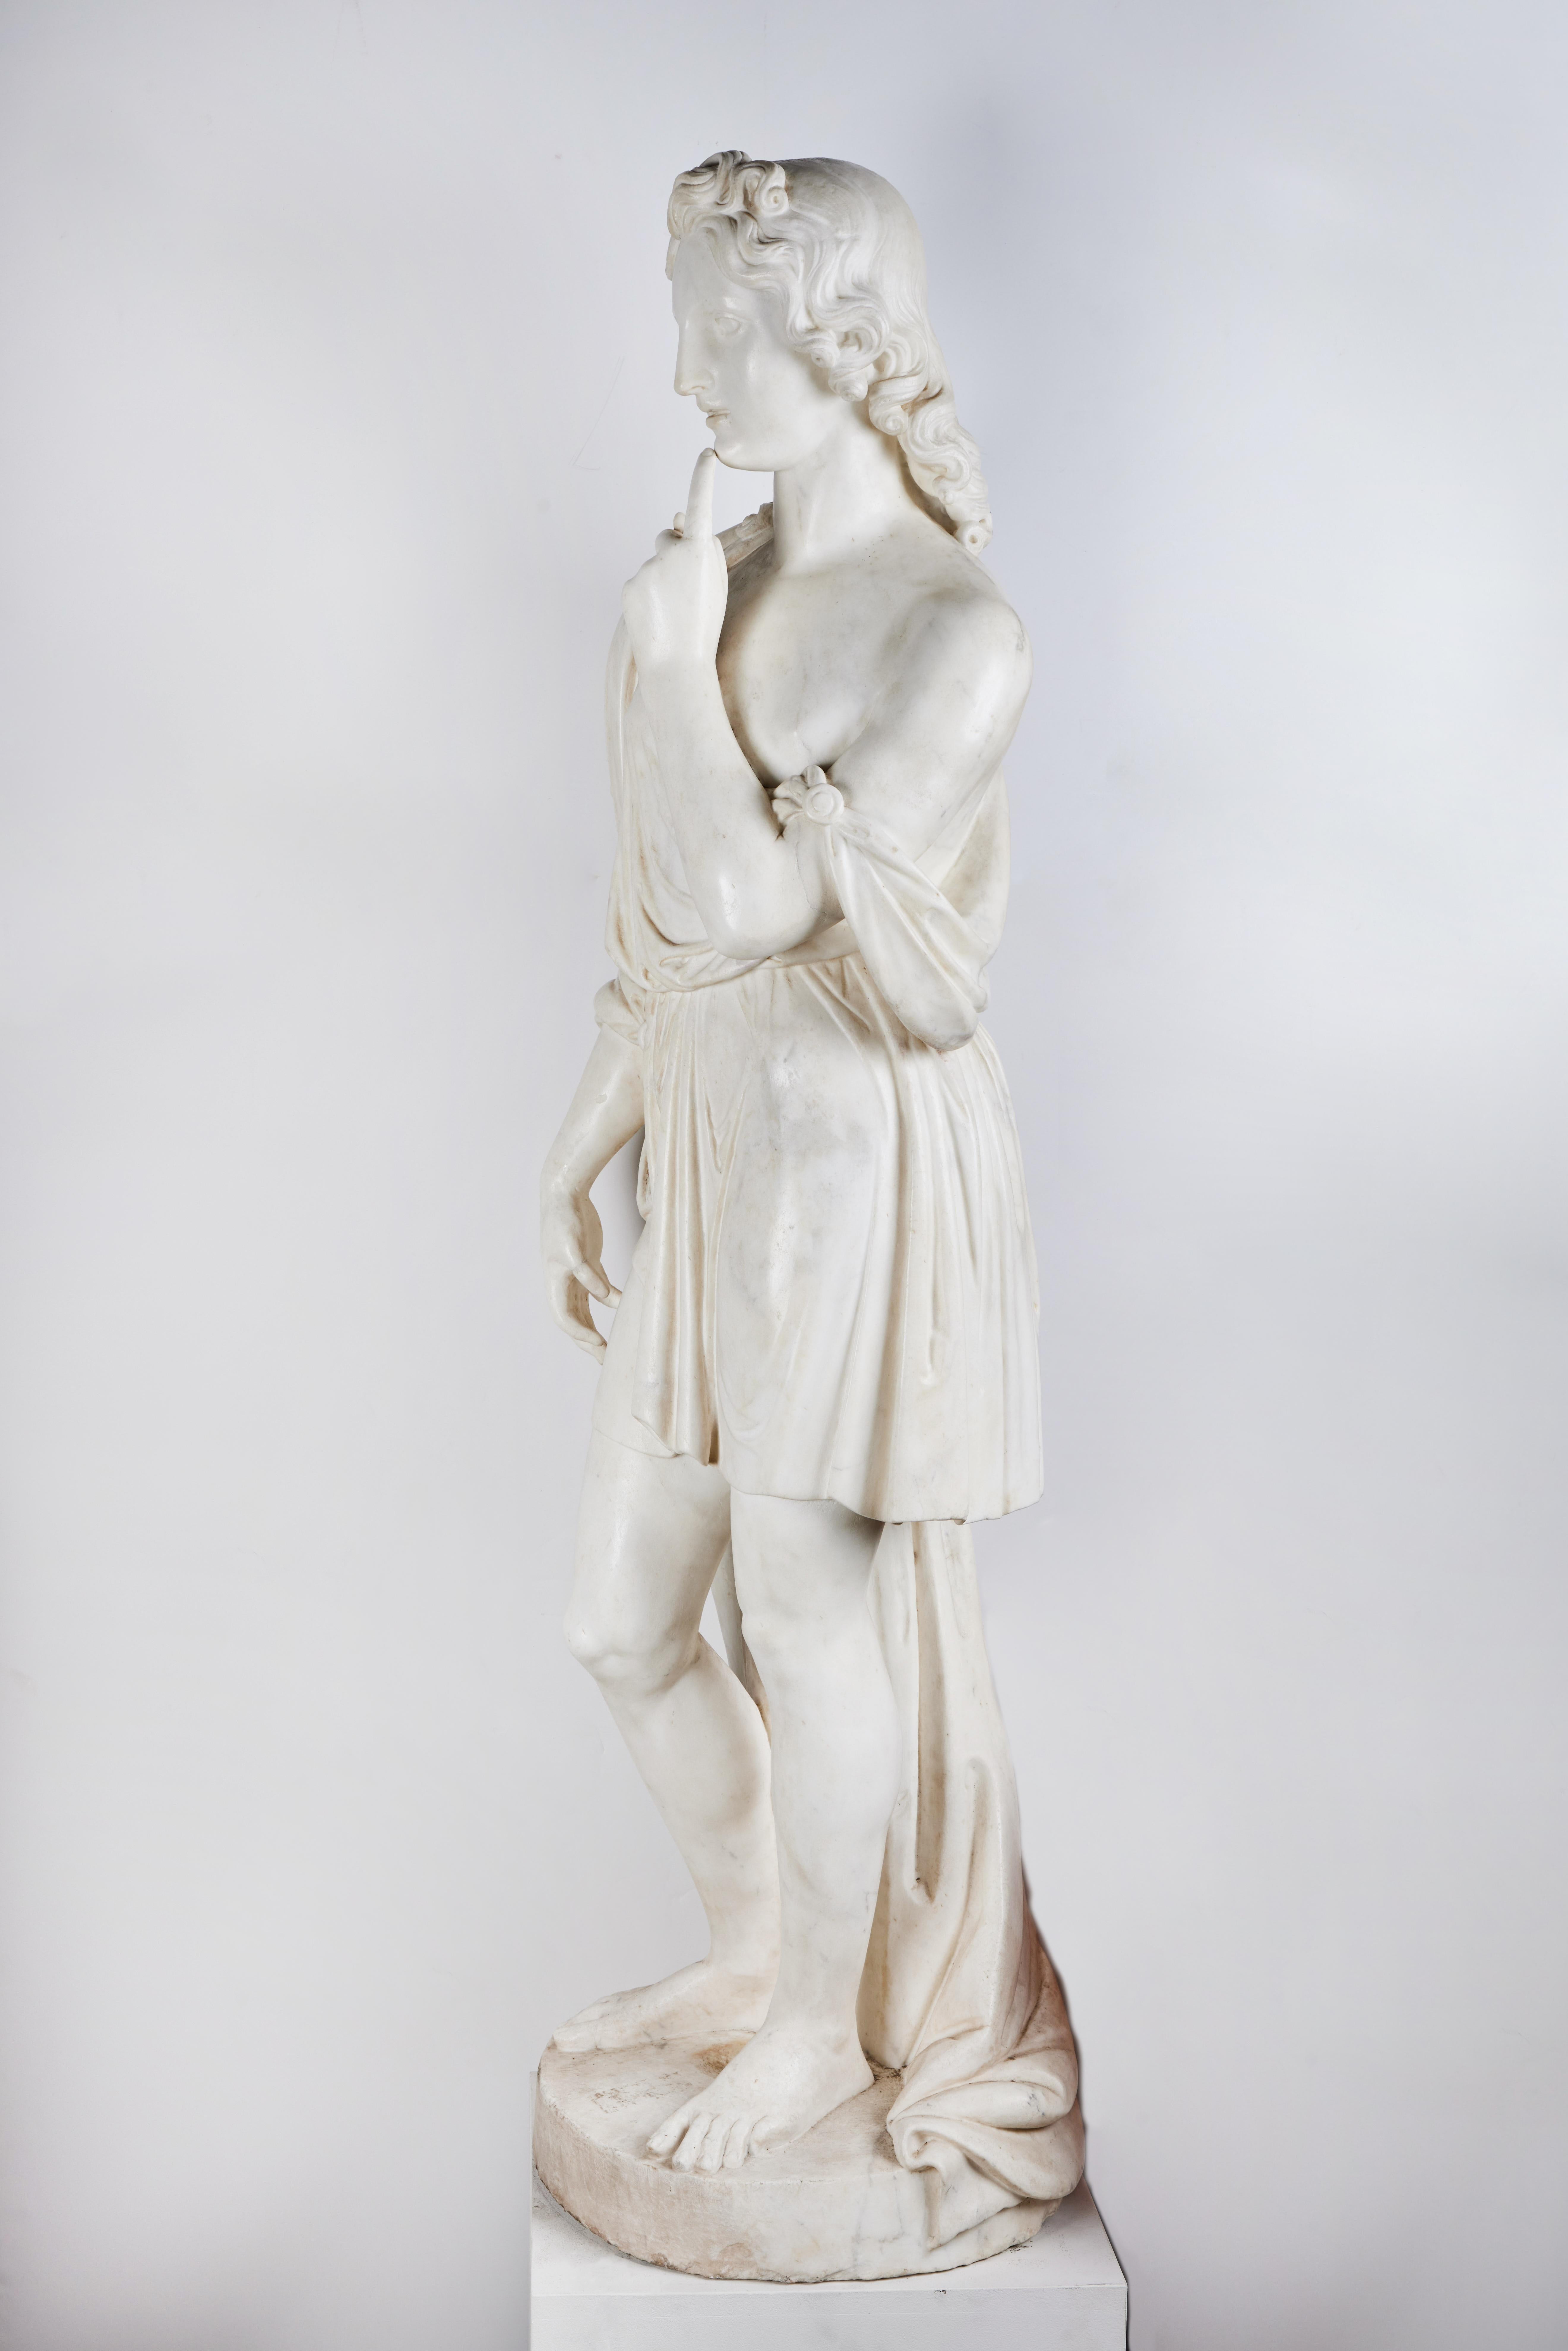 A beautifully hand carved, full size Carrara marble figure of a boy. The robe is elegantly draped with clasps.